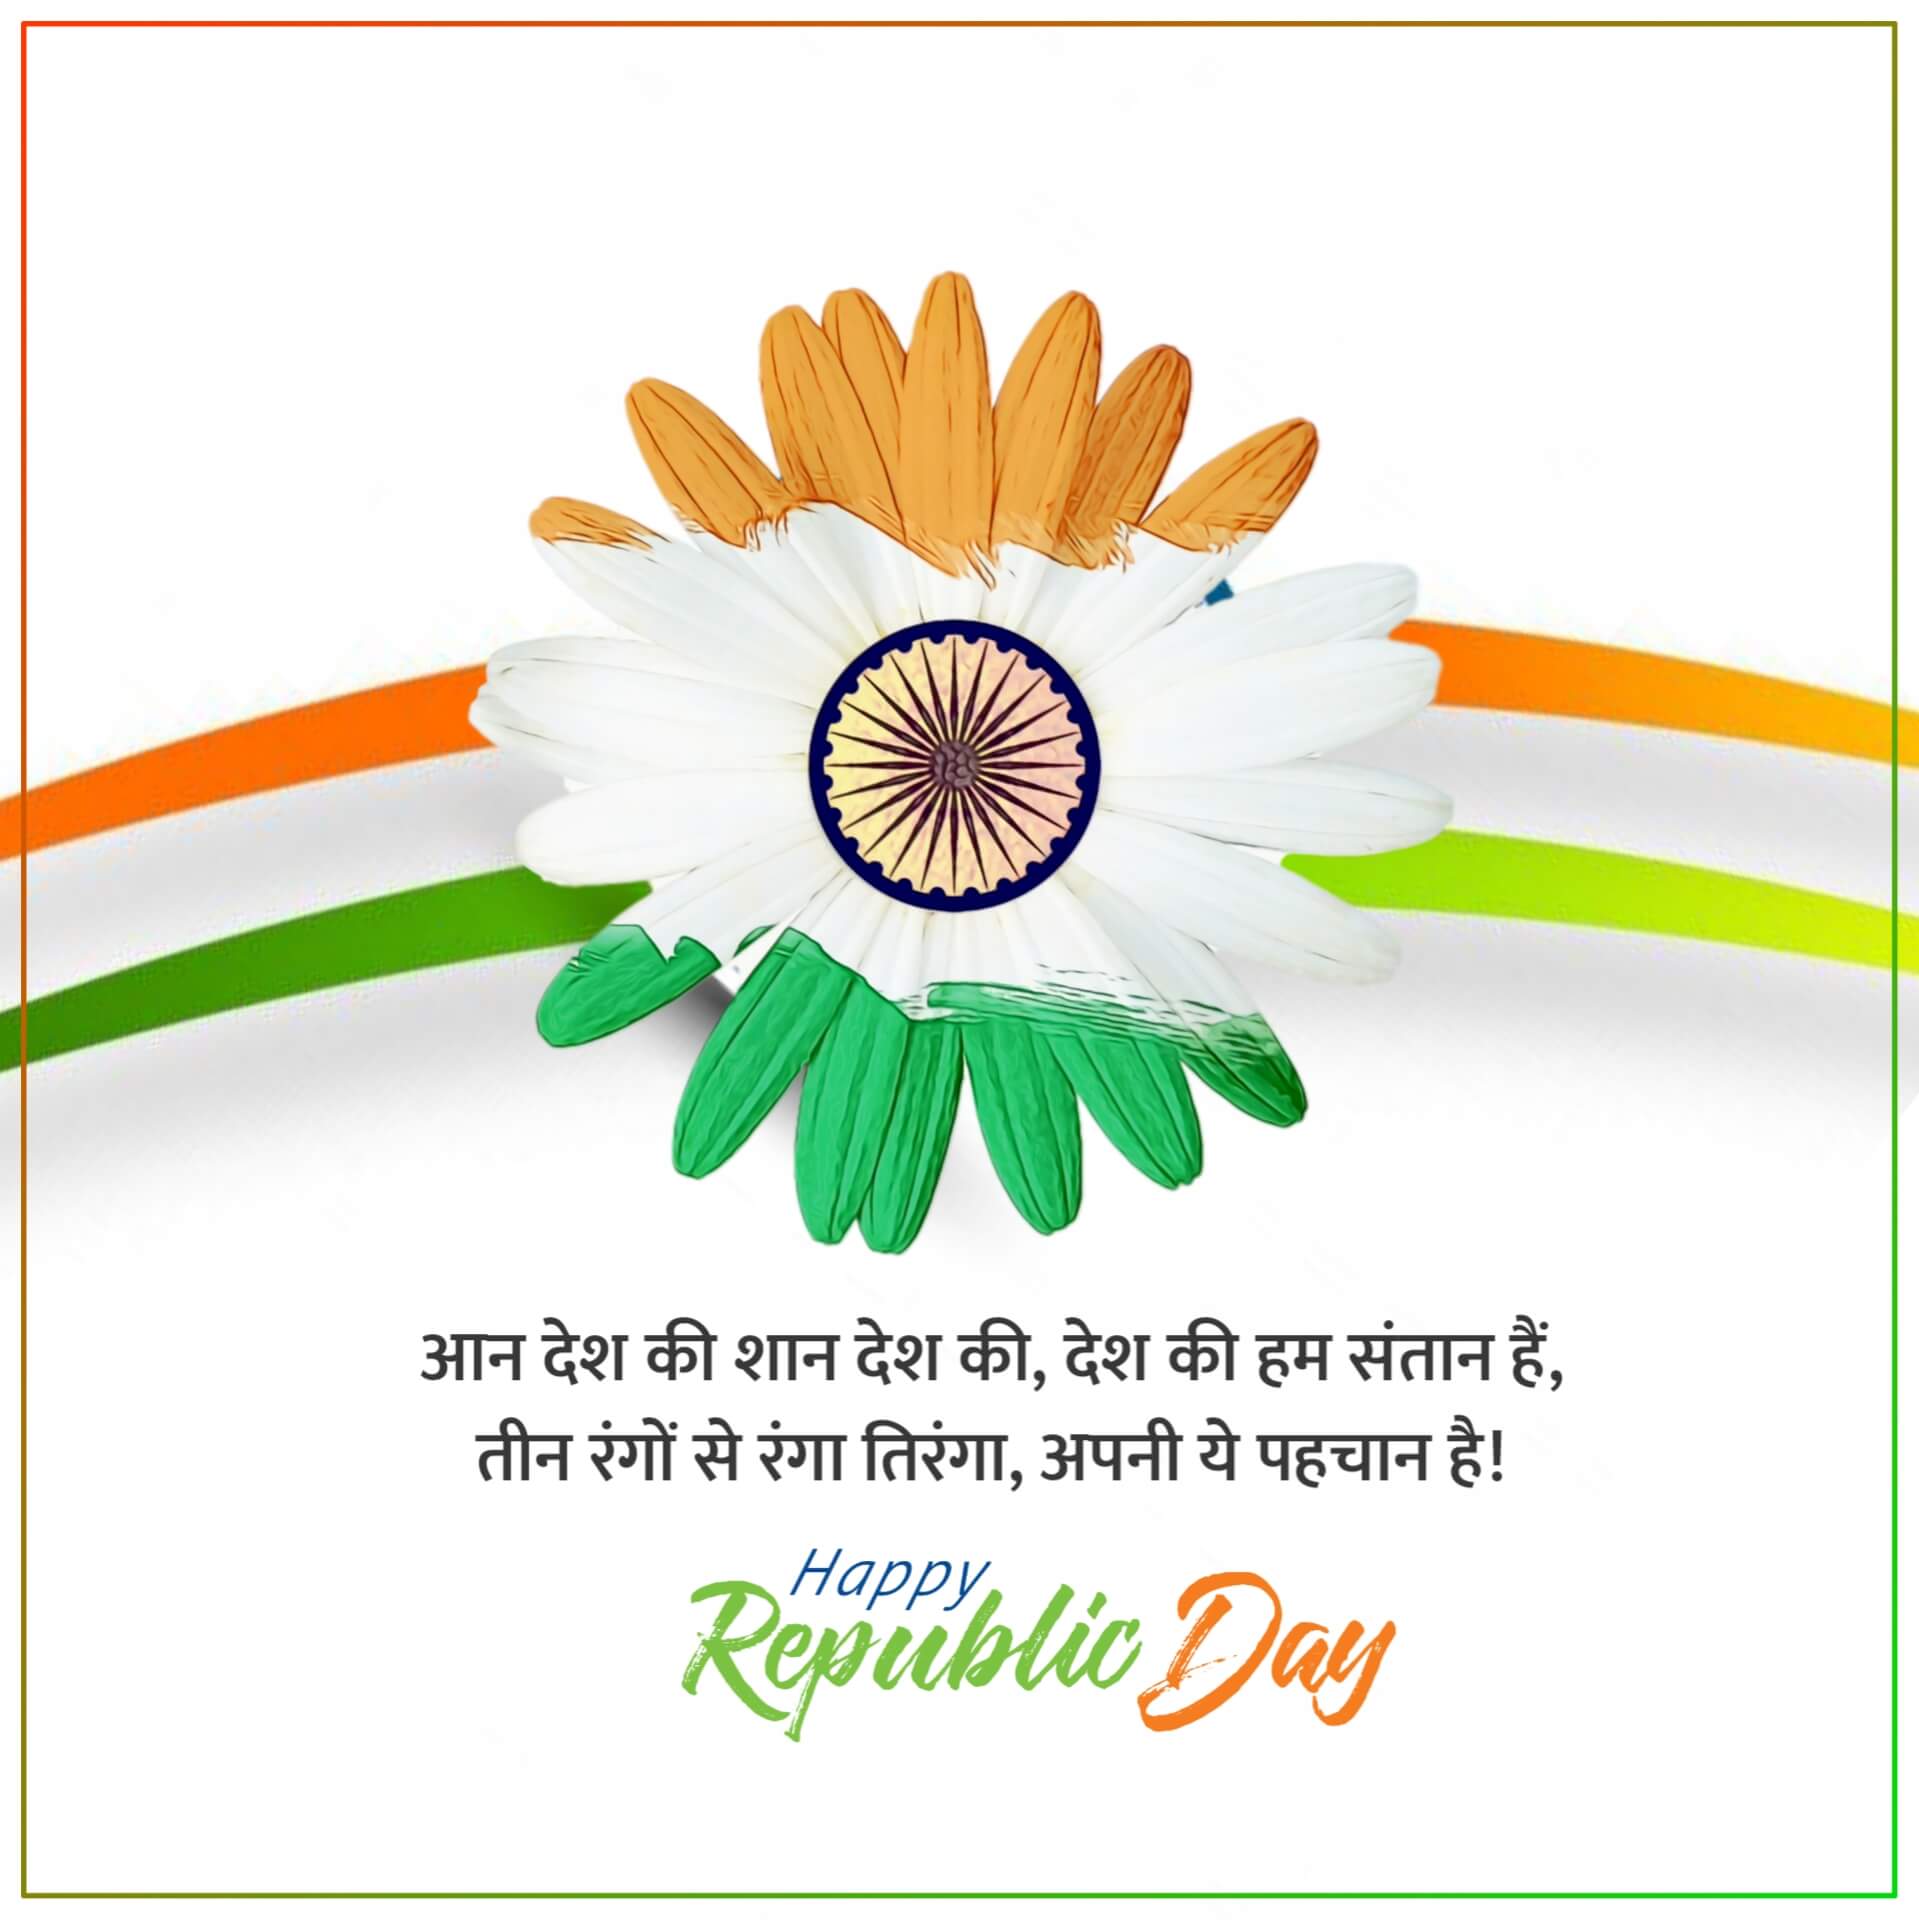 Beautiful Republic Day Images in Hindi